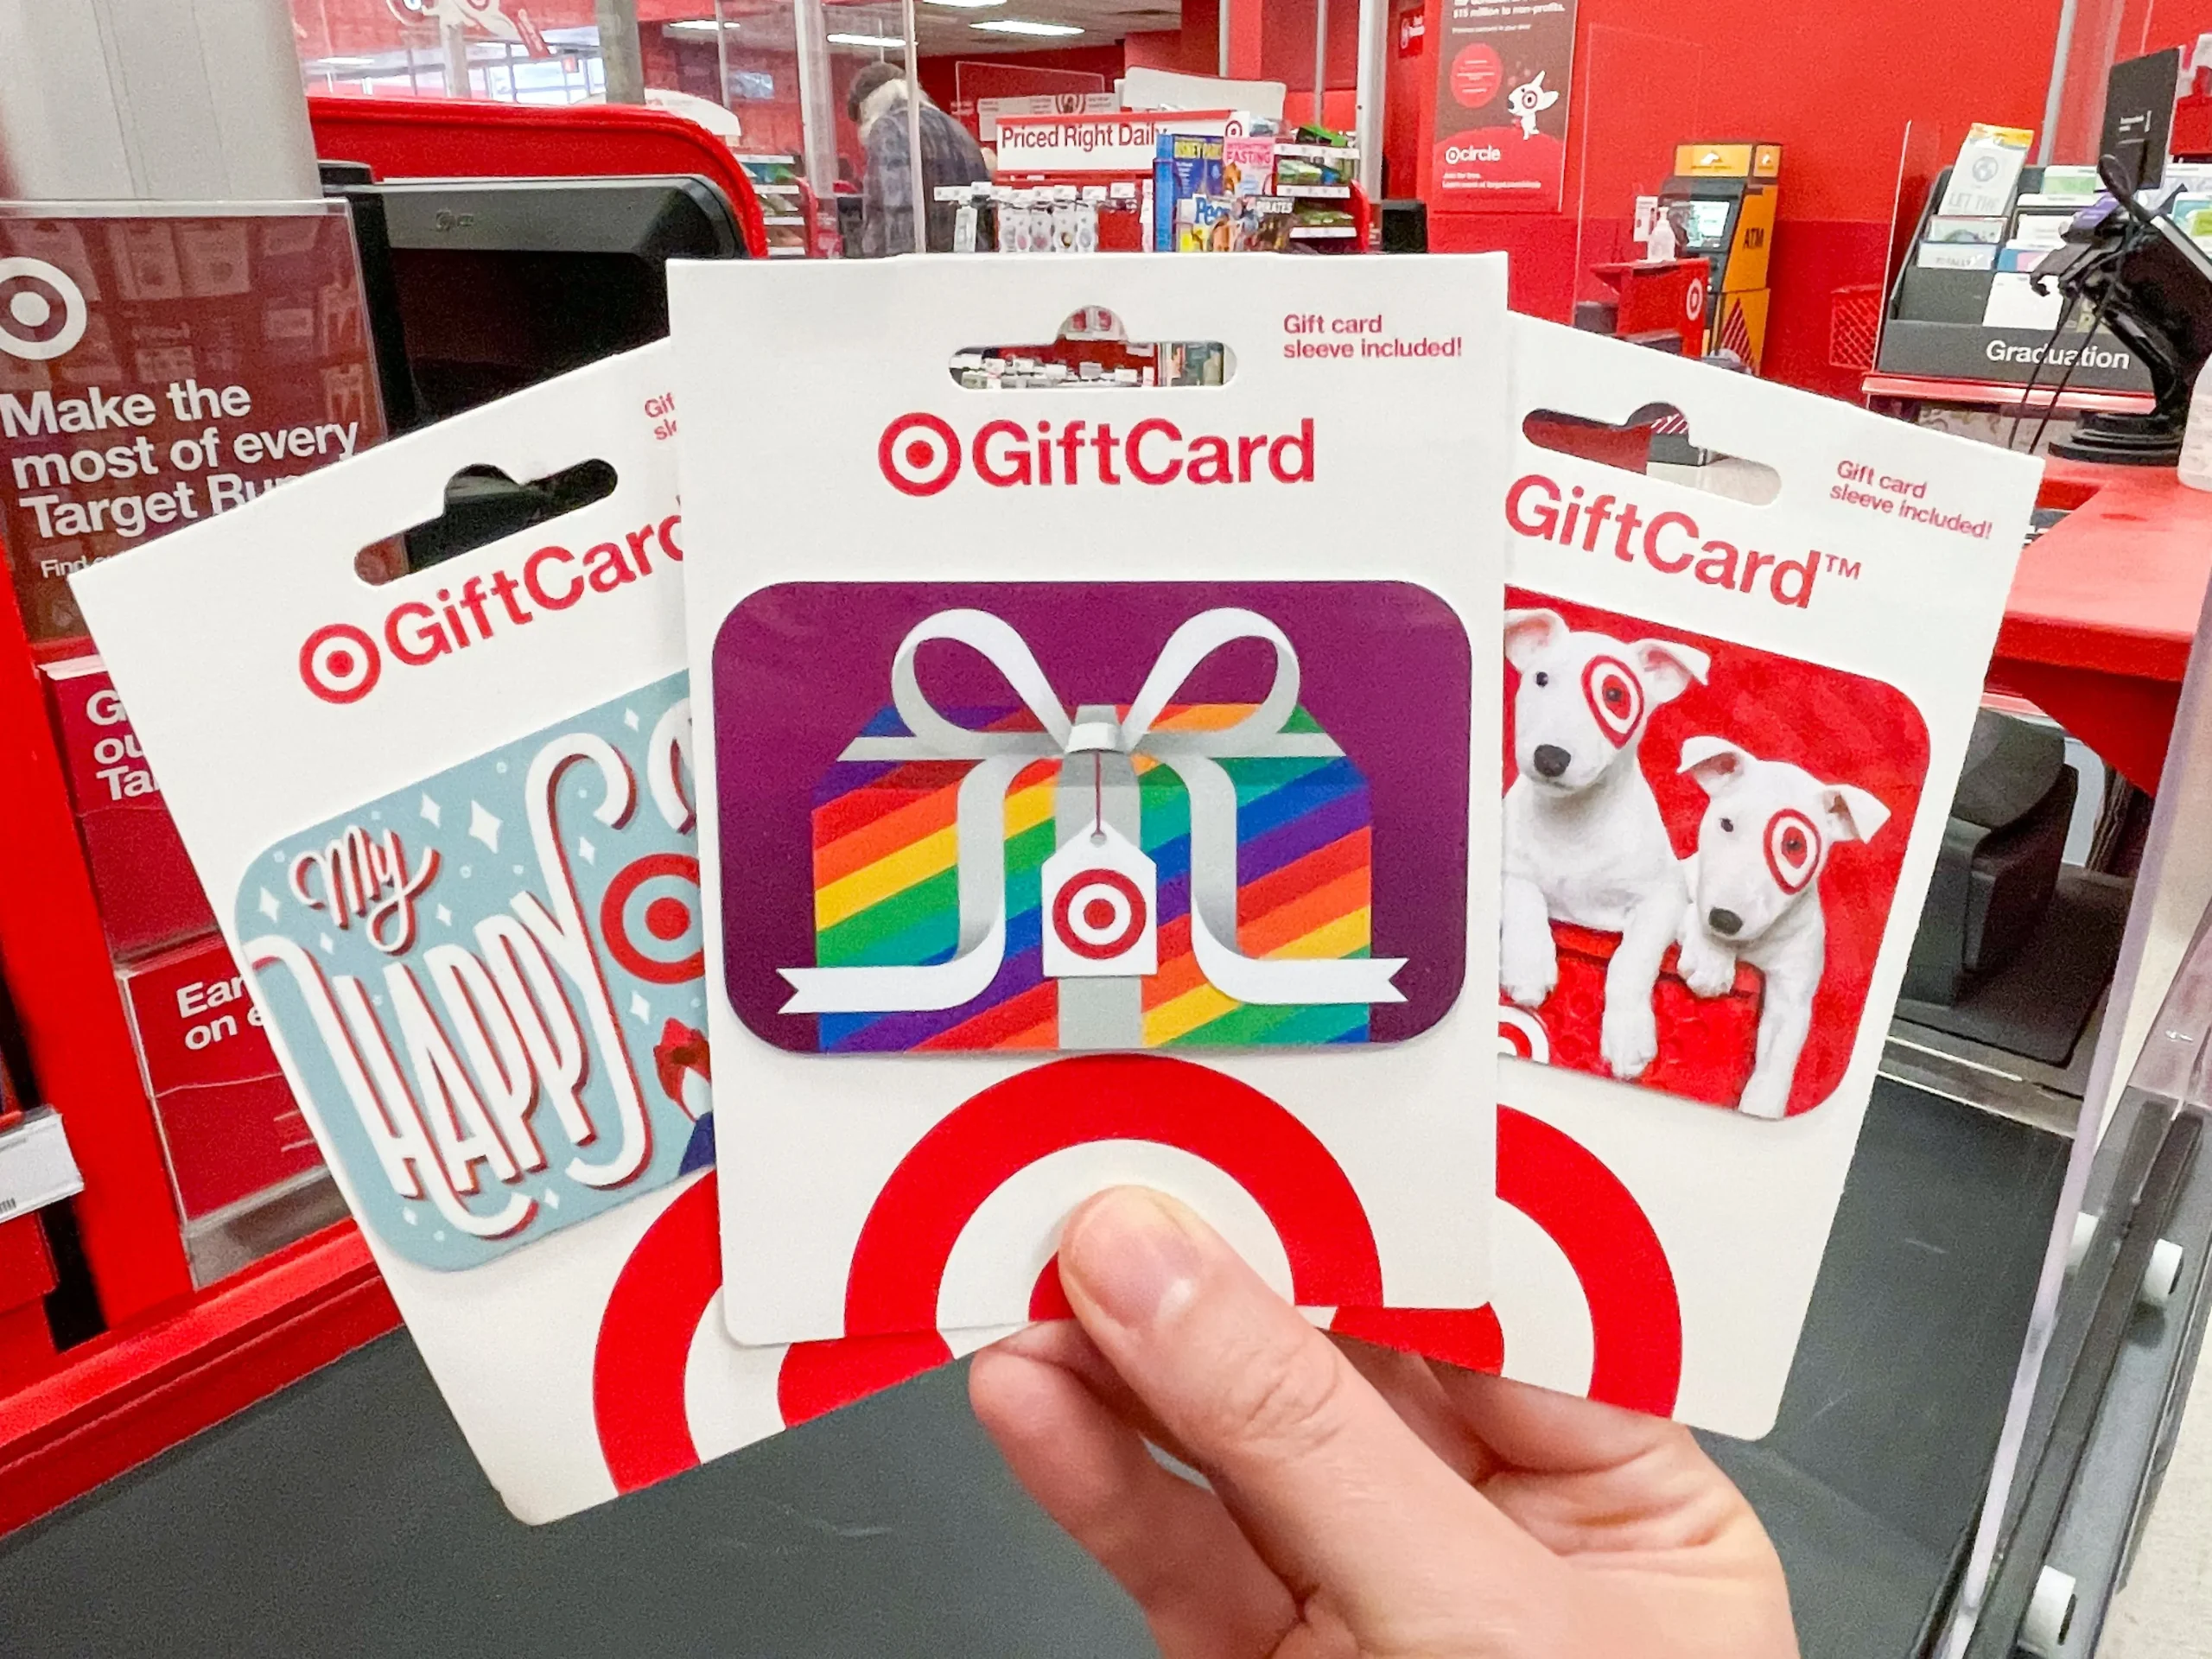 Does a Target Gift Card Expire?